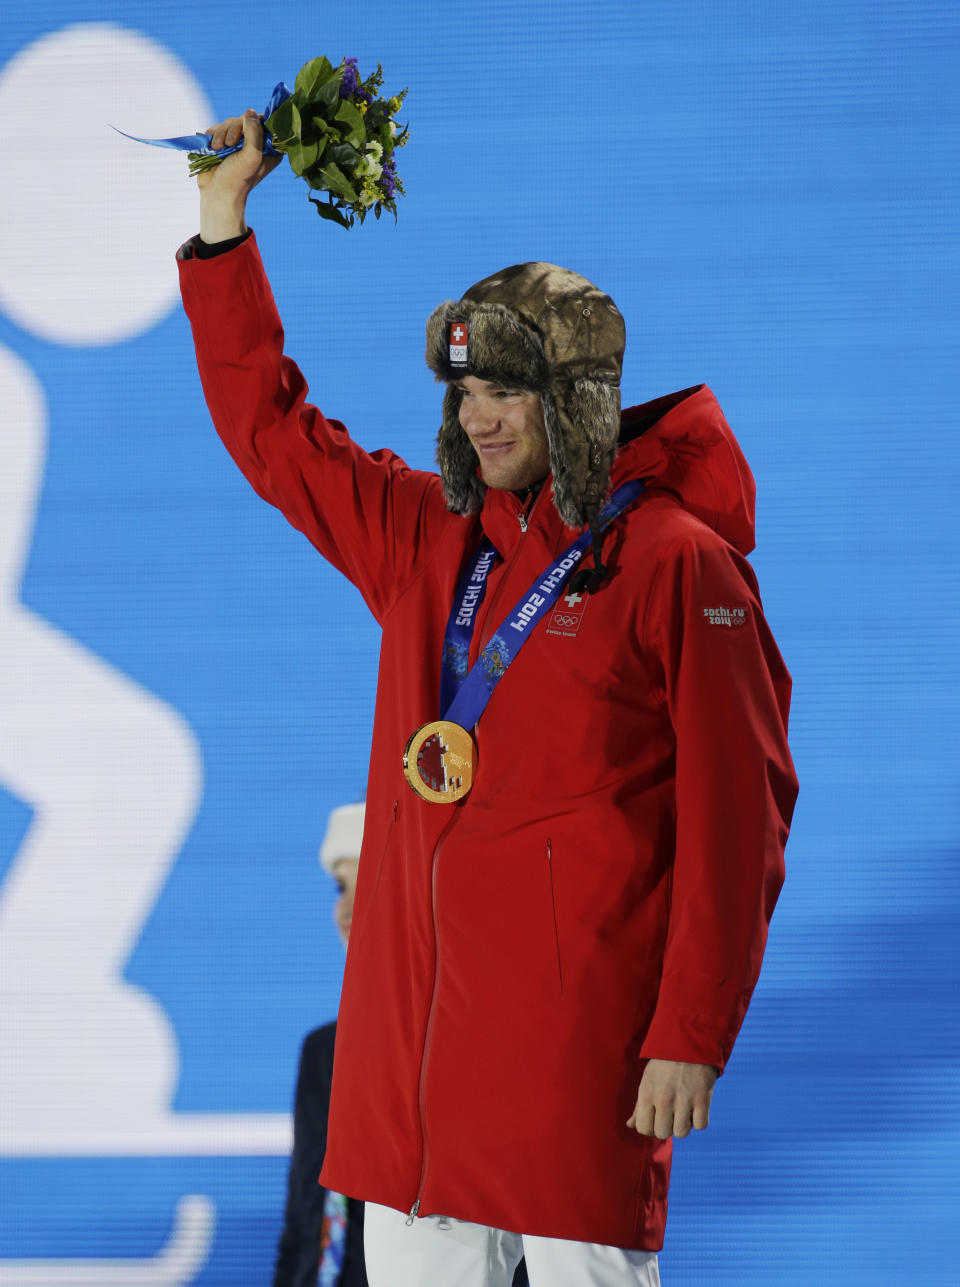 Men's cross-country 30k skiathlon gold medalist Dario Cologna of Switzerland smiles during the medals ceremony at the 2014 Winter Olympics, Sunday, Feb. 9, 2014, in Sochi, Russia. (AP Photo/Morry Gash)